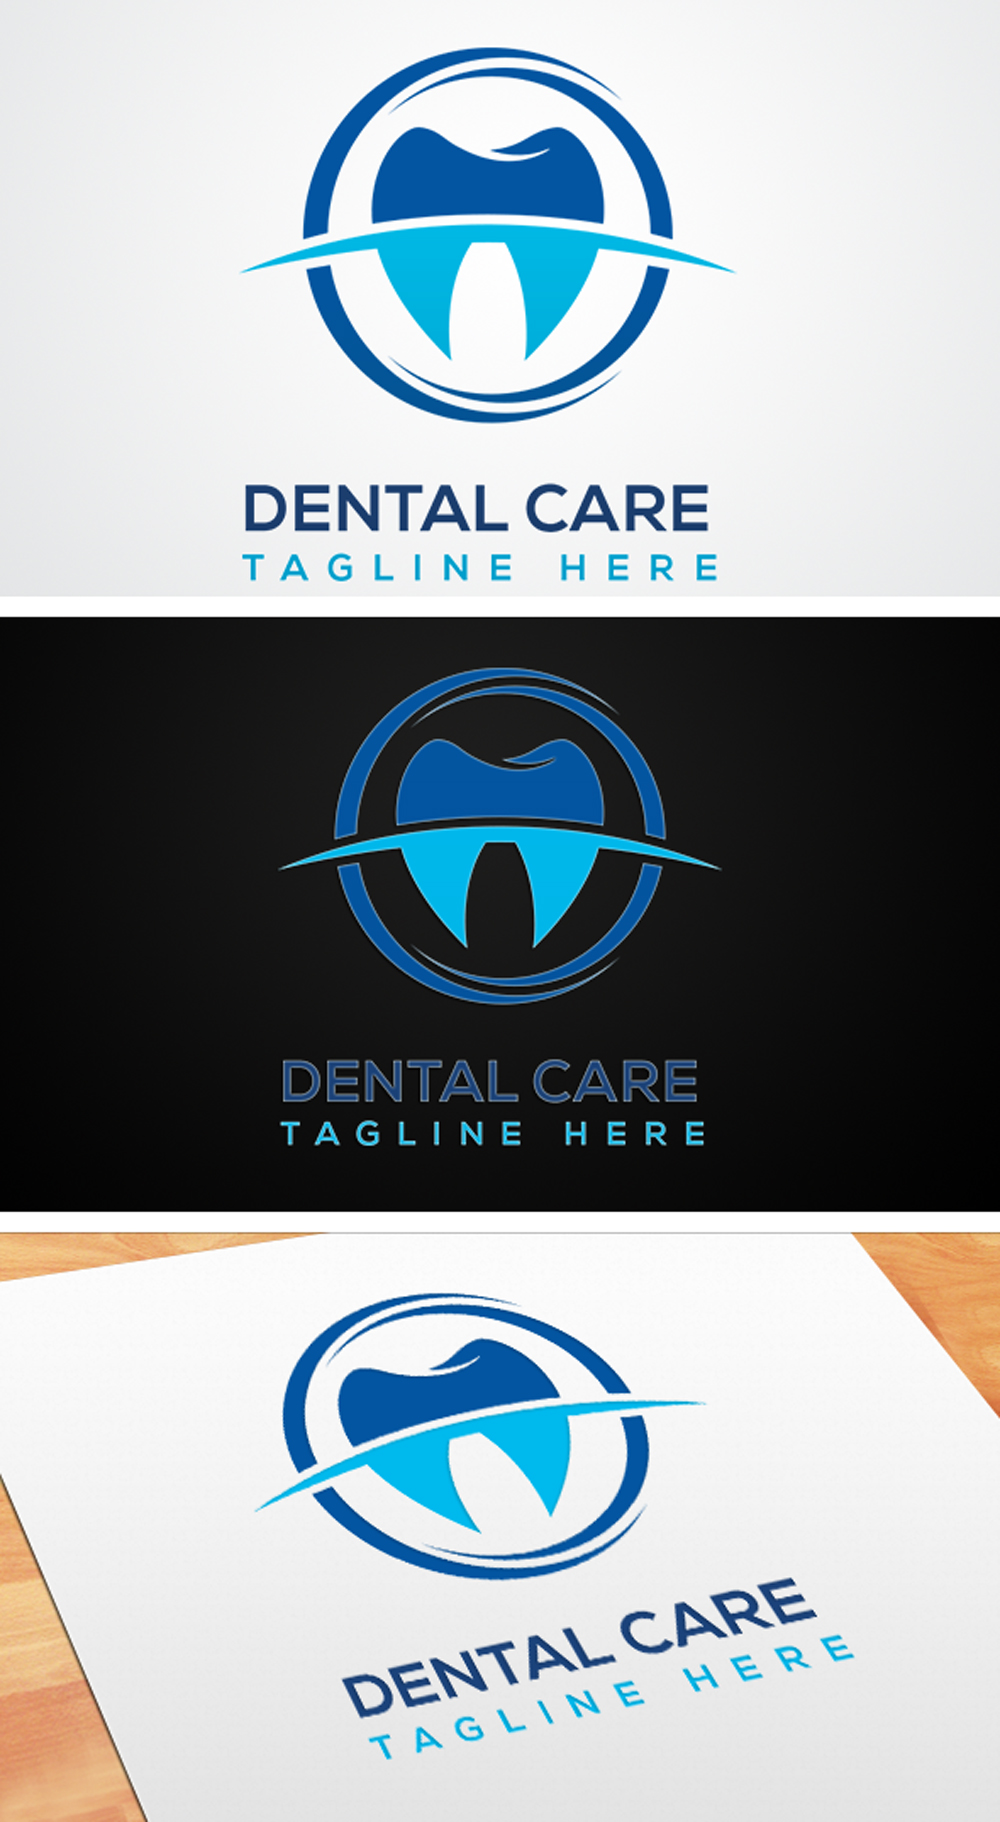 A set of images of gorgeous tooth shape logos.